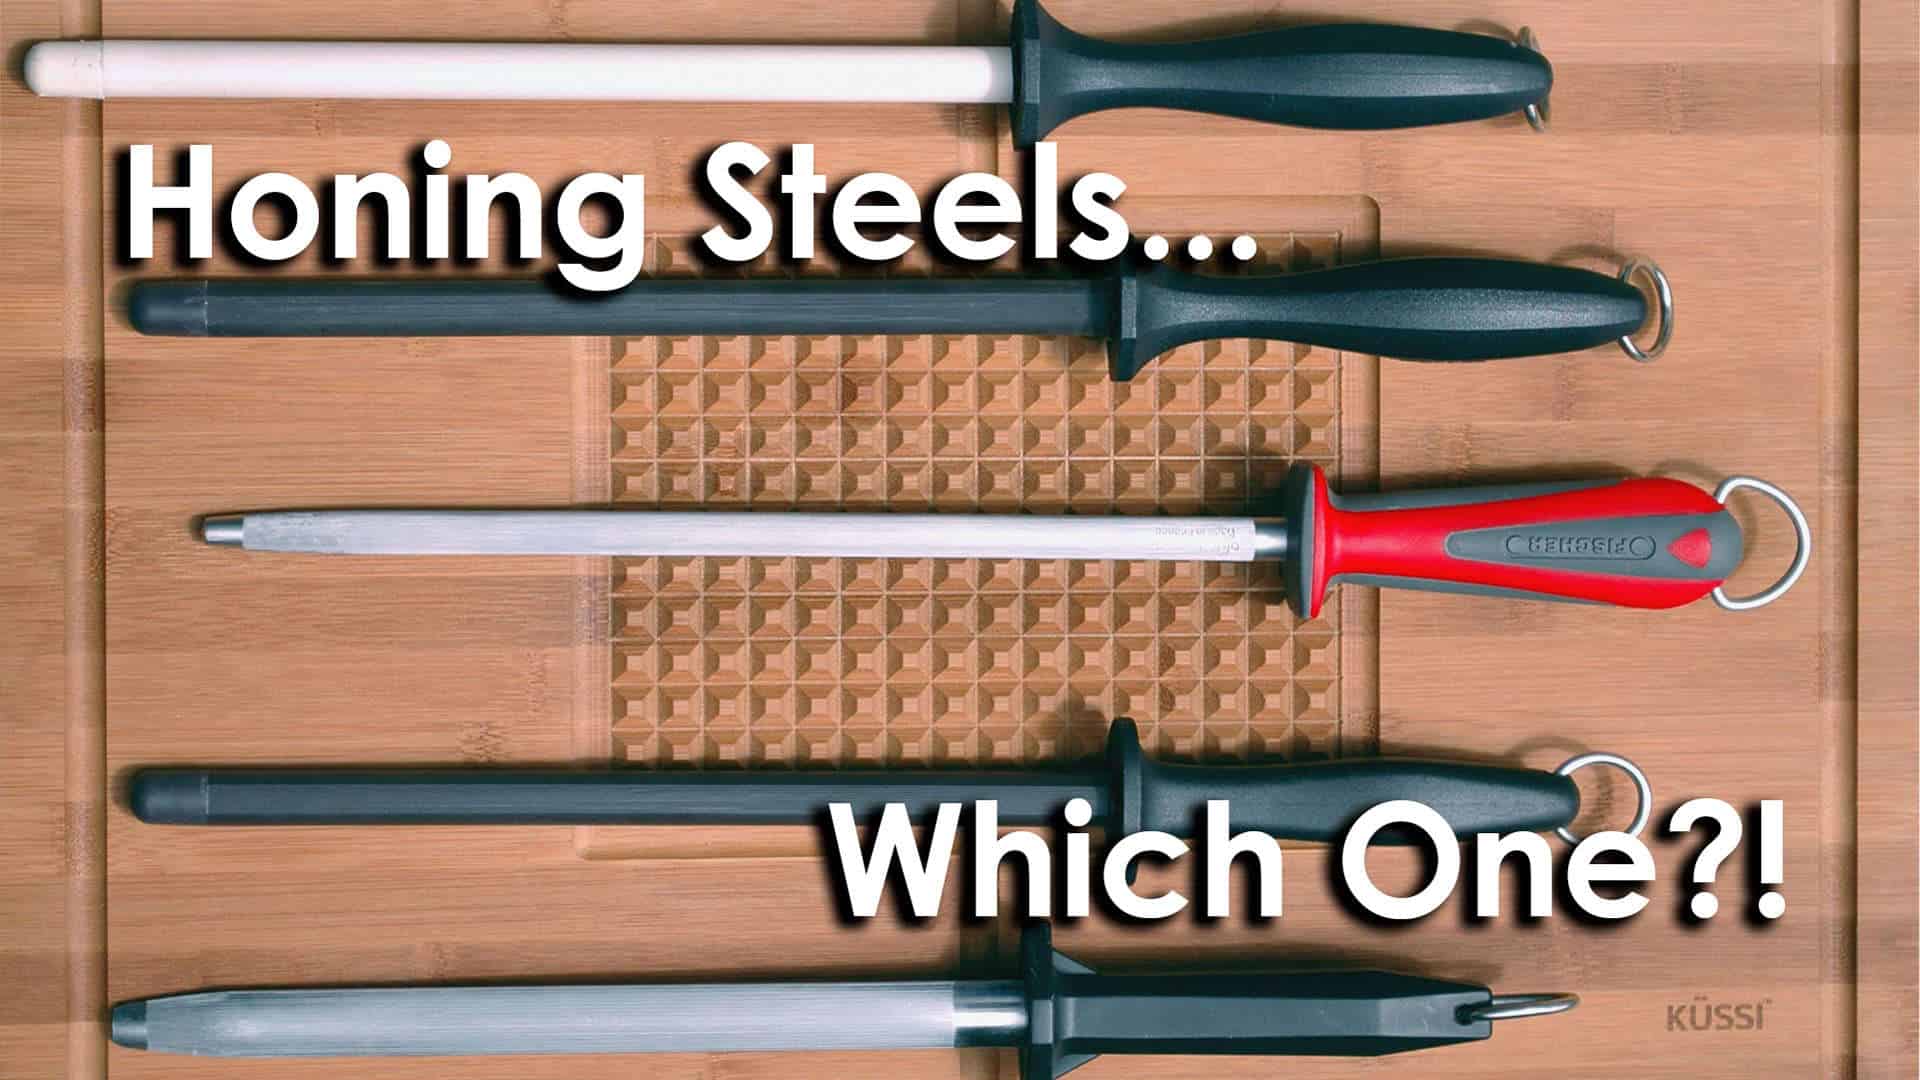 How to Use a Honing Steel